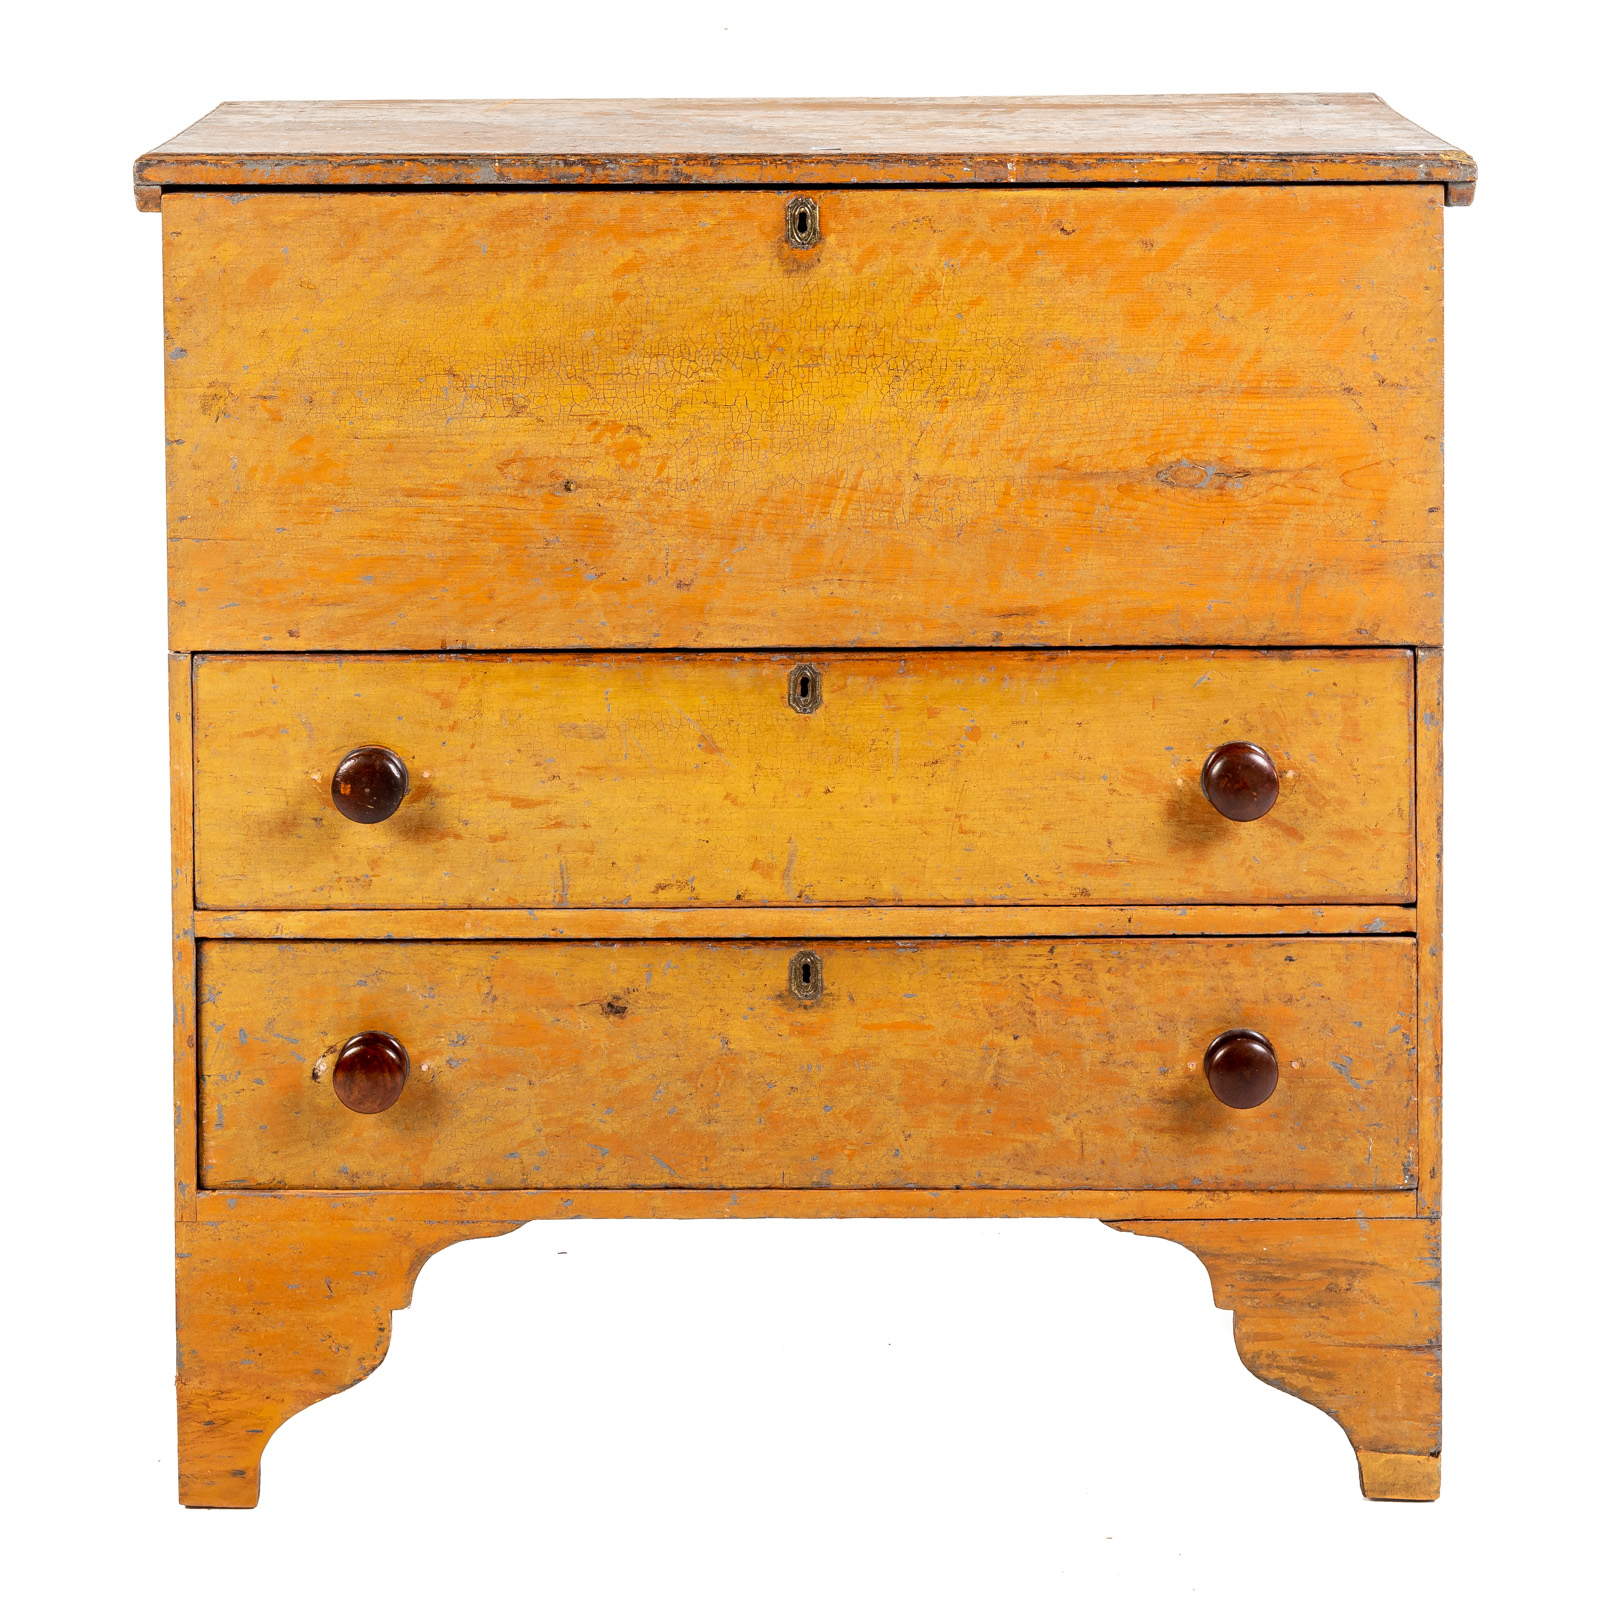 COUNTRY MUSTARD PAINTED MULE CHEST